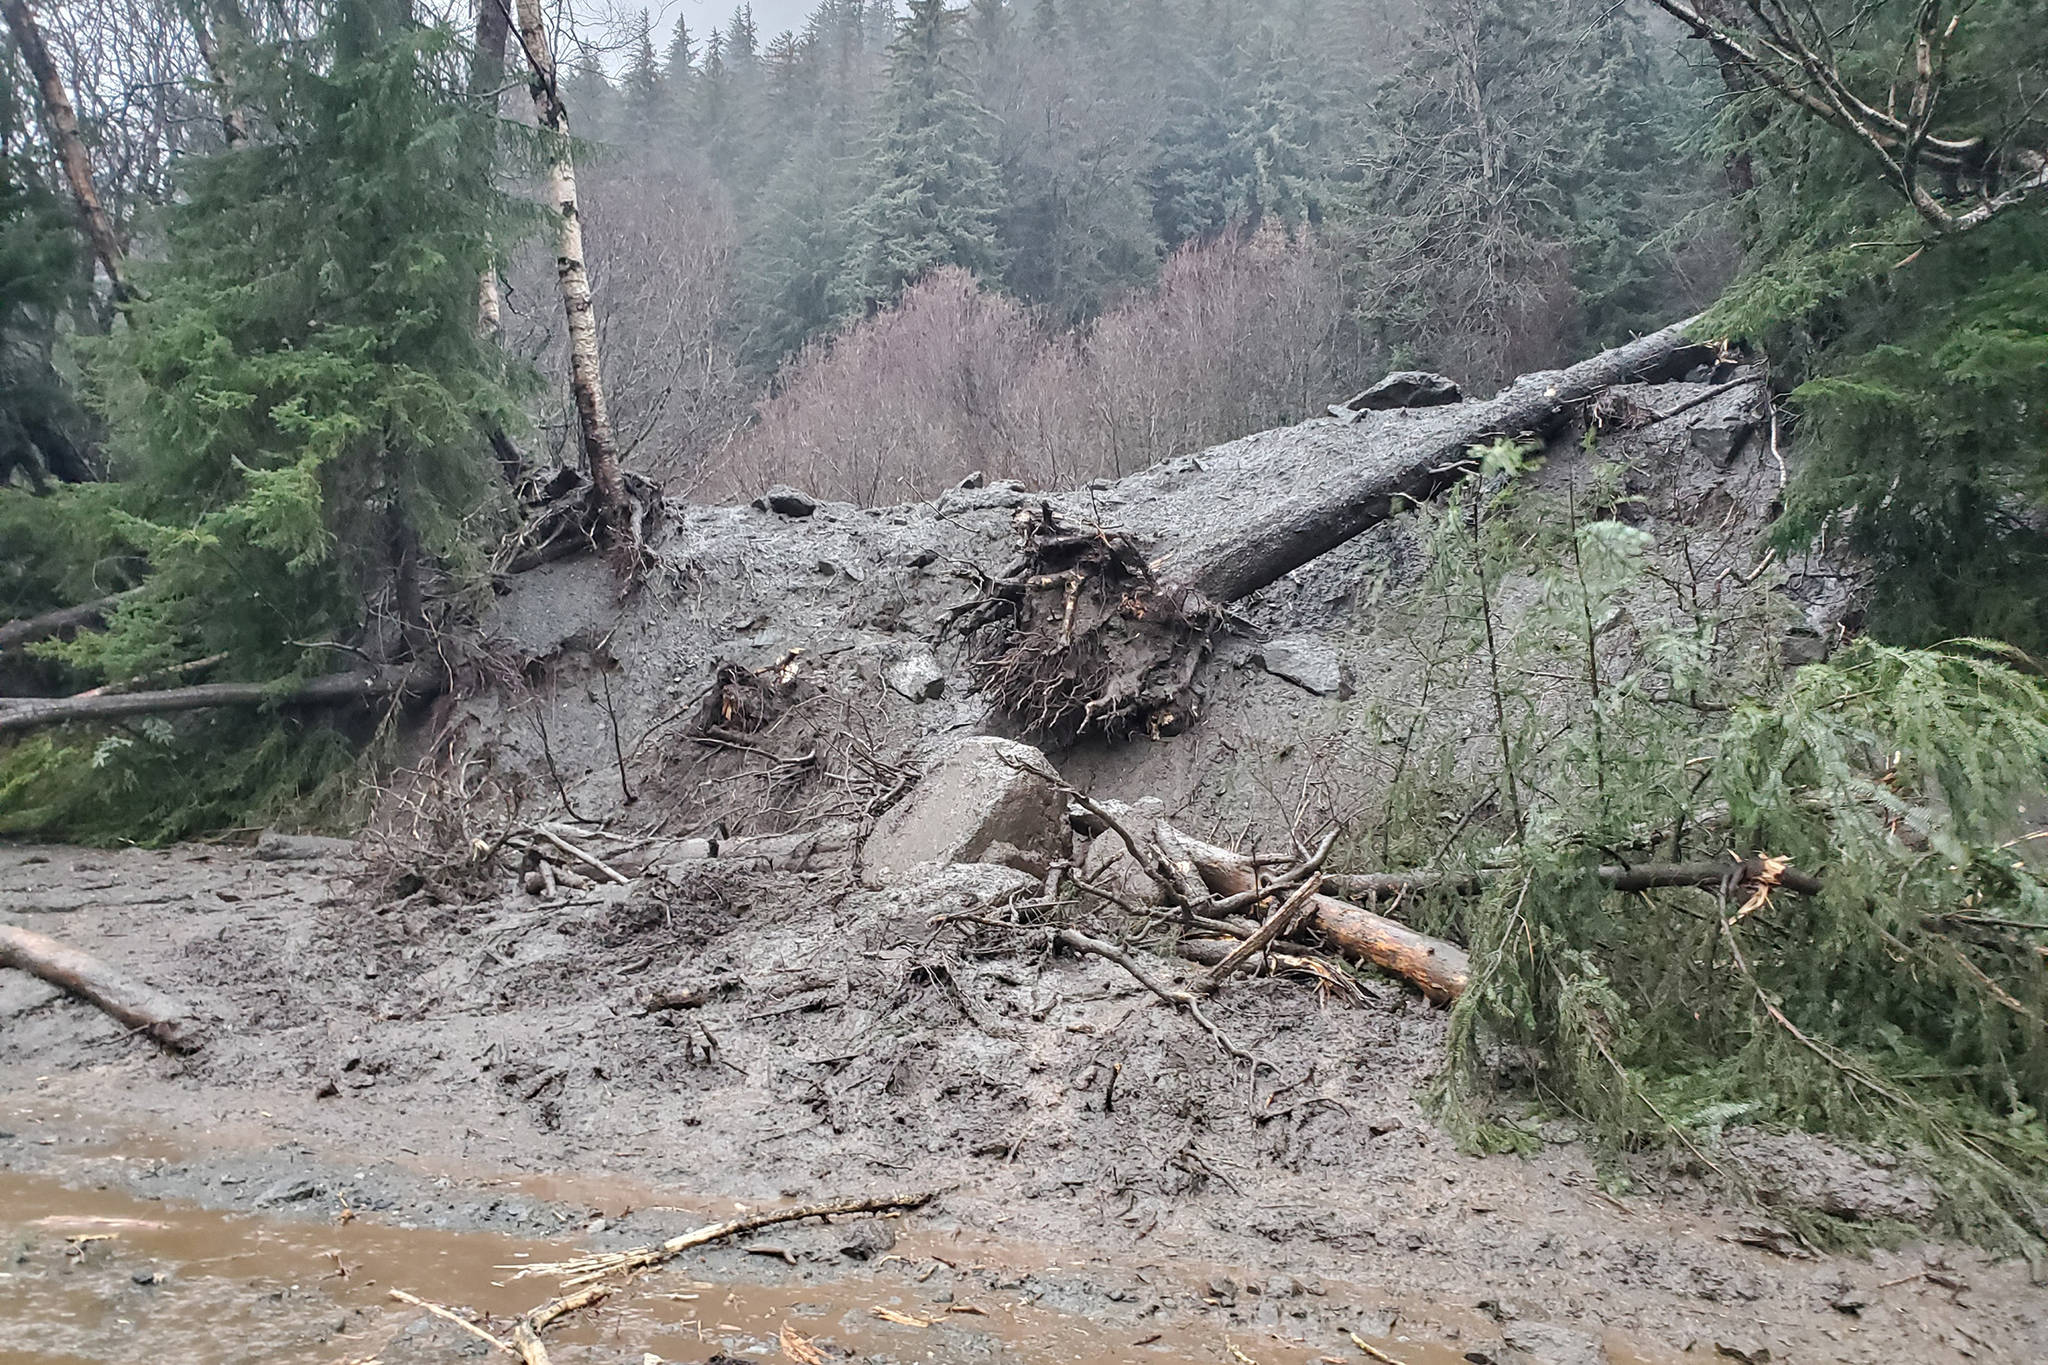 This photo hows damage from heavy rains and a mudslide 600 feet wide in Haines, Alaska, on Wednesday, Dec. 2, 2020. Authorities say six people are unaccounted for, and four homes were destroyed in the slide, with the search resuming Thursday morning for survivors. (Matt Boron/Alaska Department of Transportation and Public Facilities)